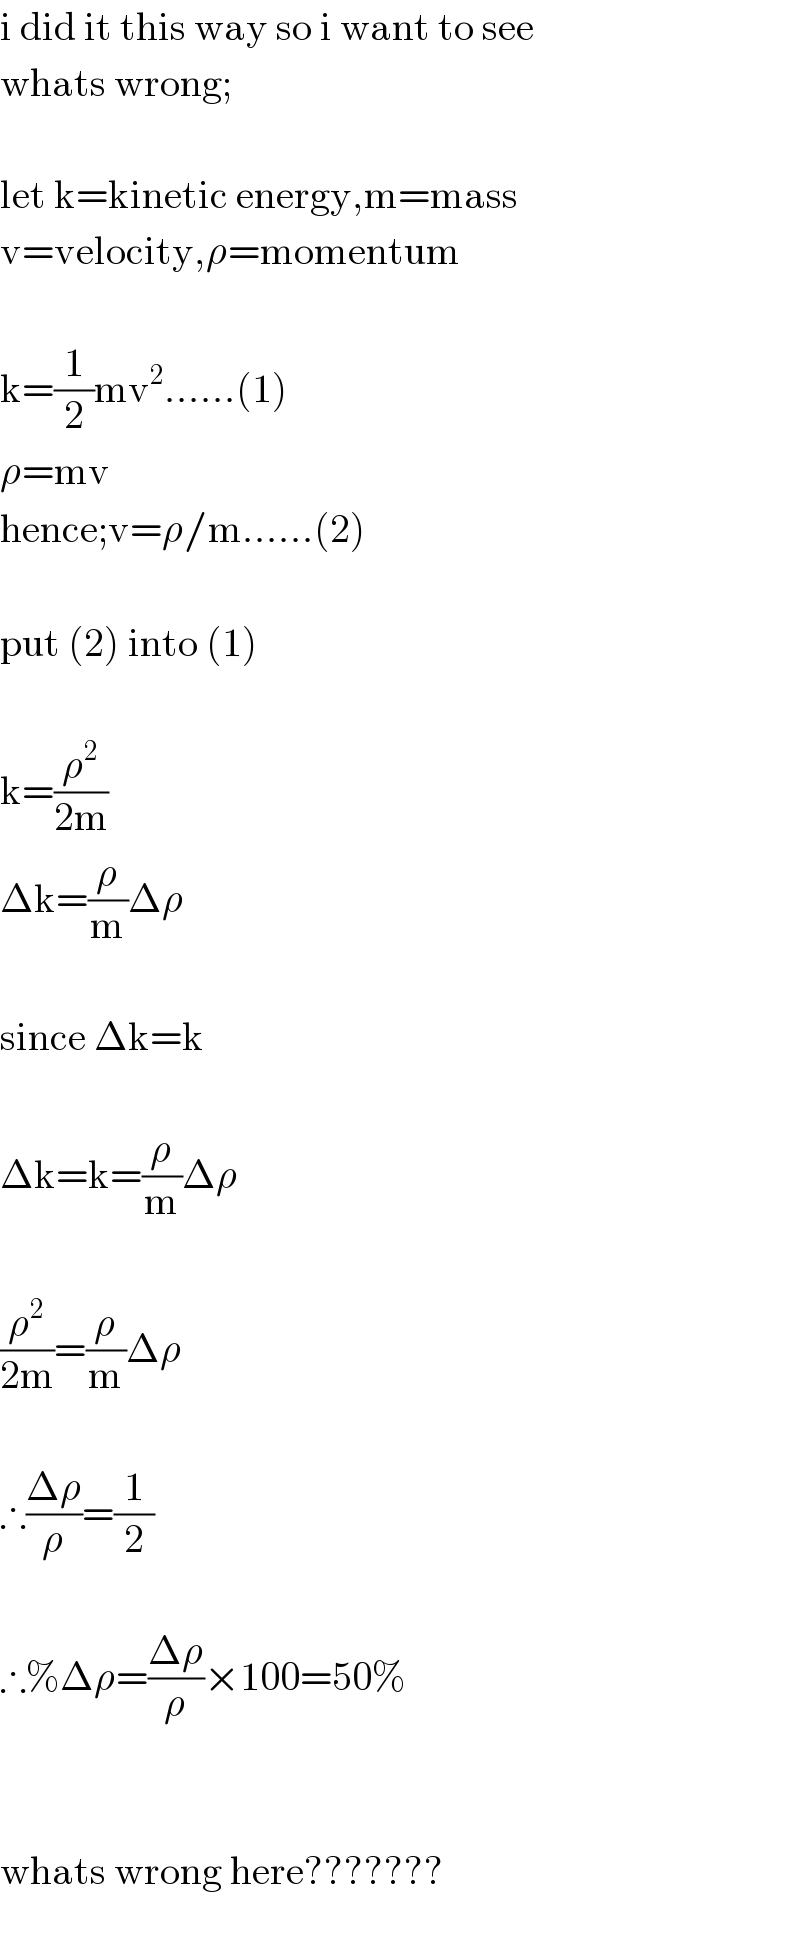 i did it this way so i want to see  whats wrong;    let k=kinetic energy,m=mass  v=velocity,ρ=momentum    k=(1/2)mv^2 ......(1)  ρ=mv  hence;v=ρ/m......(2)    put (2) into (1)    k=(ρ^2 /(2m))  Δk=(ρ/m)Δρ    since Δk=k    Δk=k=(ρ/m)Δρ    (ρ^2 /(2m))=(ρ/m)Δρ    ∴((Δρ)/ρ)=(1/2)    ∴%Δρ=((Δρ)/ρ)×100=50%      whats wrong here???????    